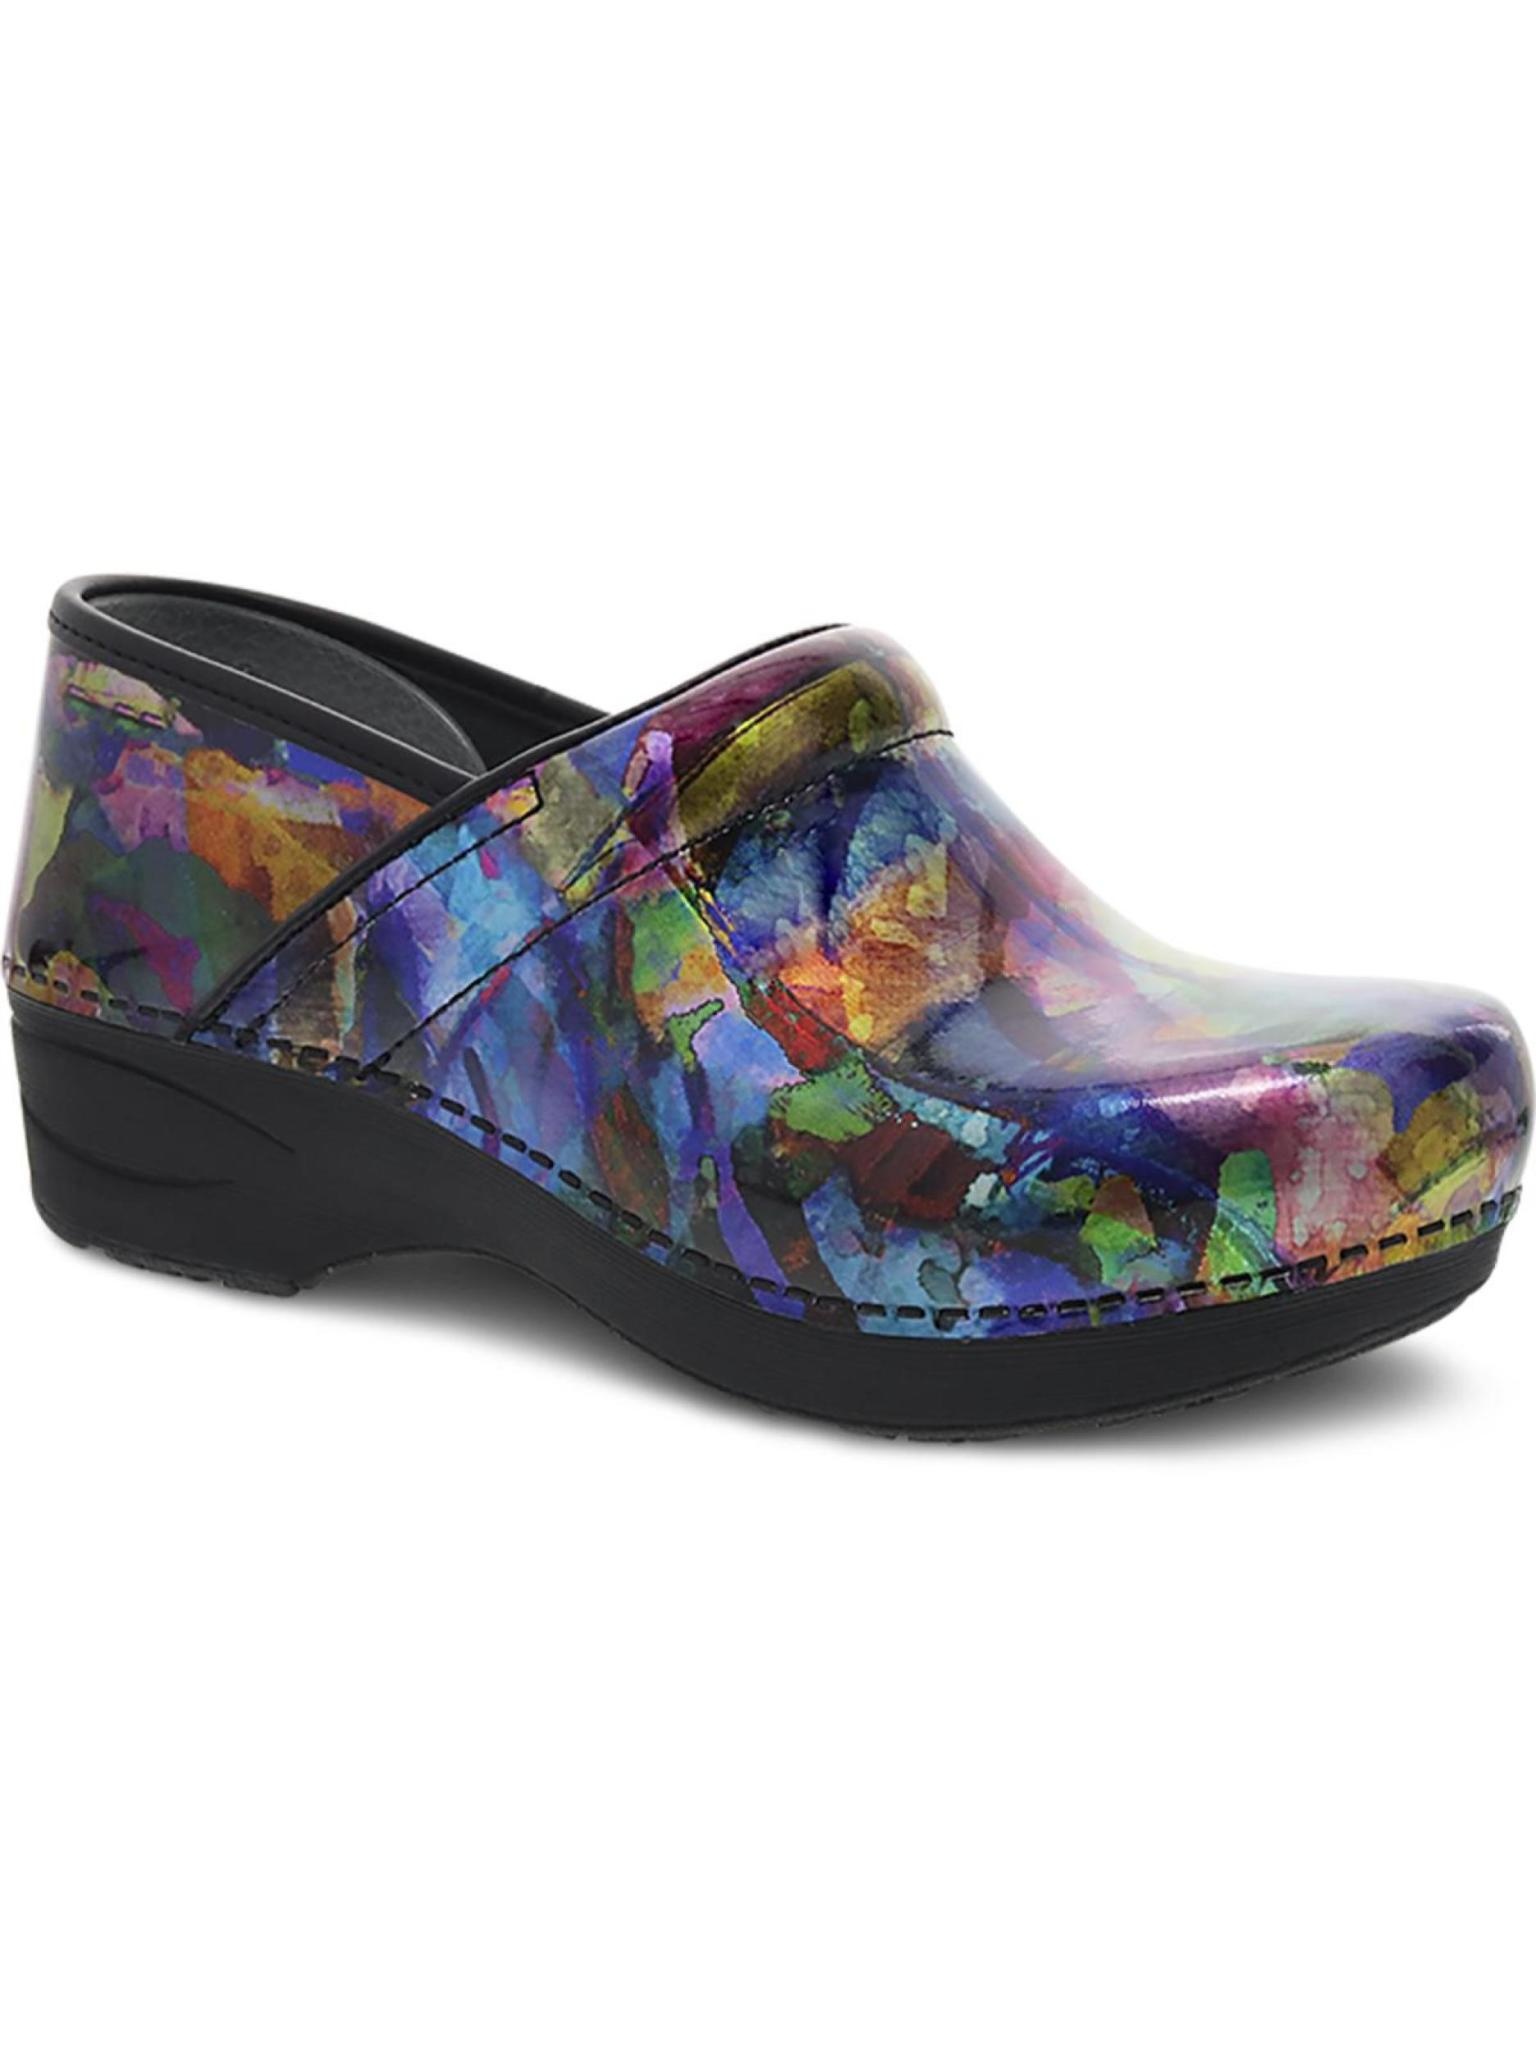 SOFT FOOTBED DANSKO WOMEN'S PROFESSIONAL CLOG XP 2.0 ARCH SUPPORT 